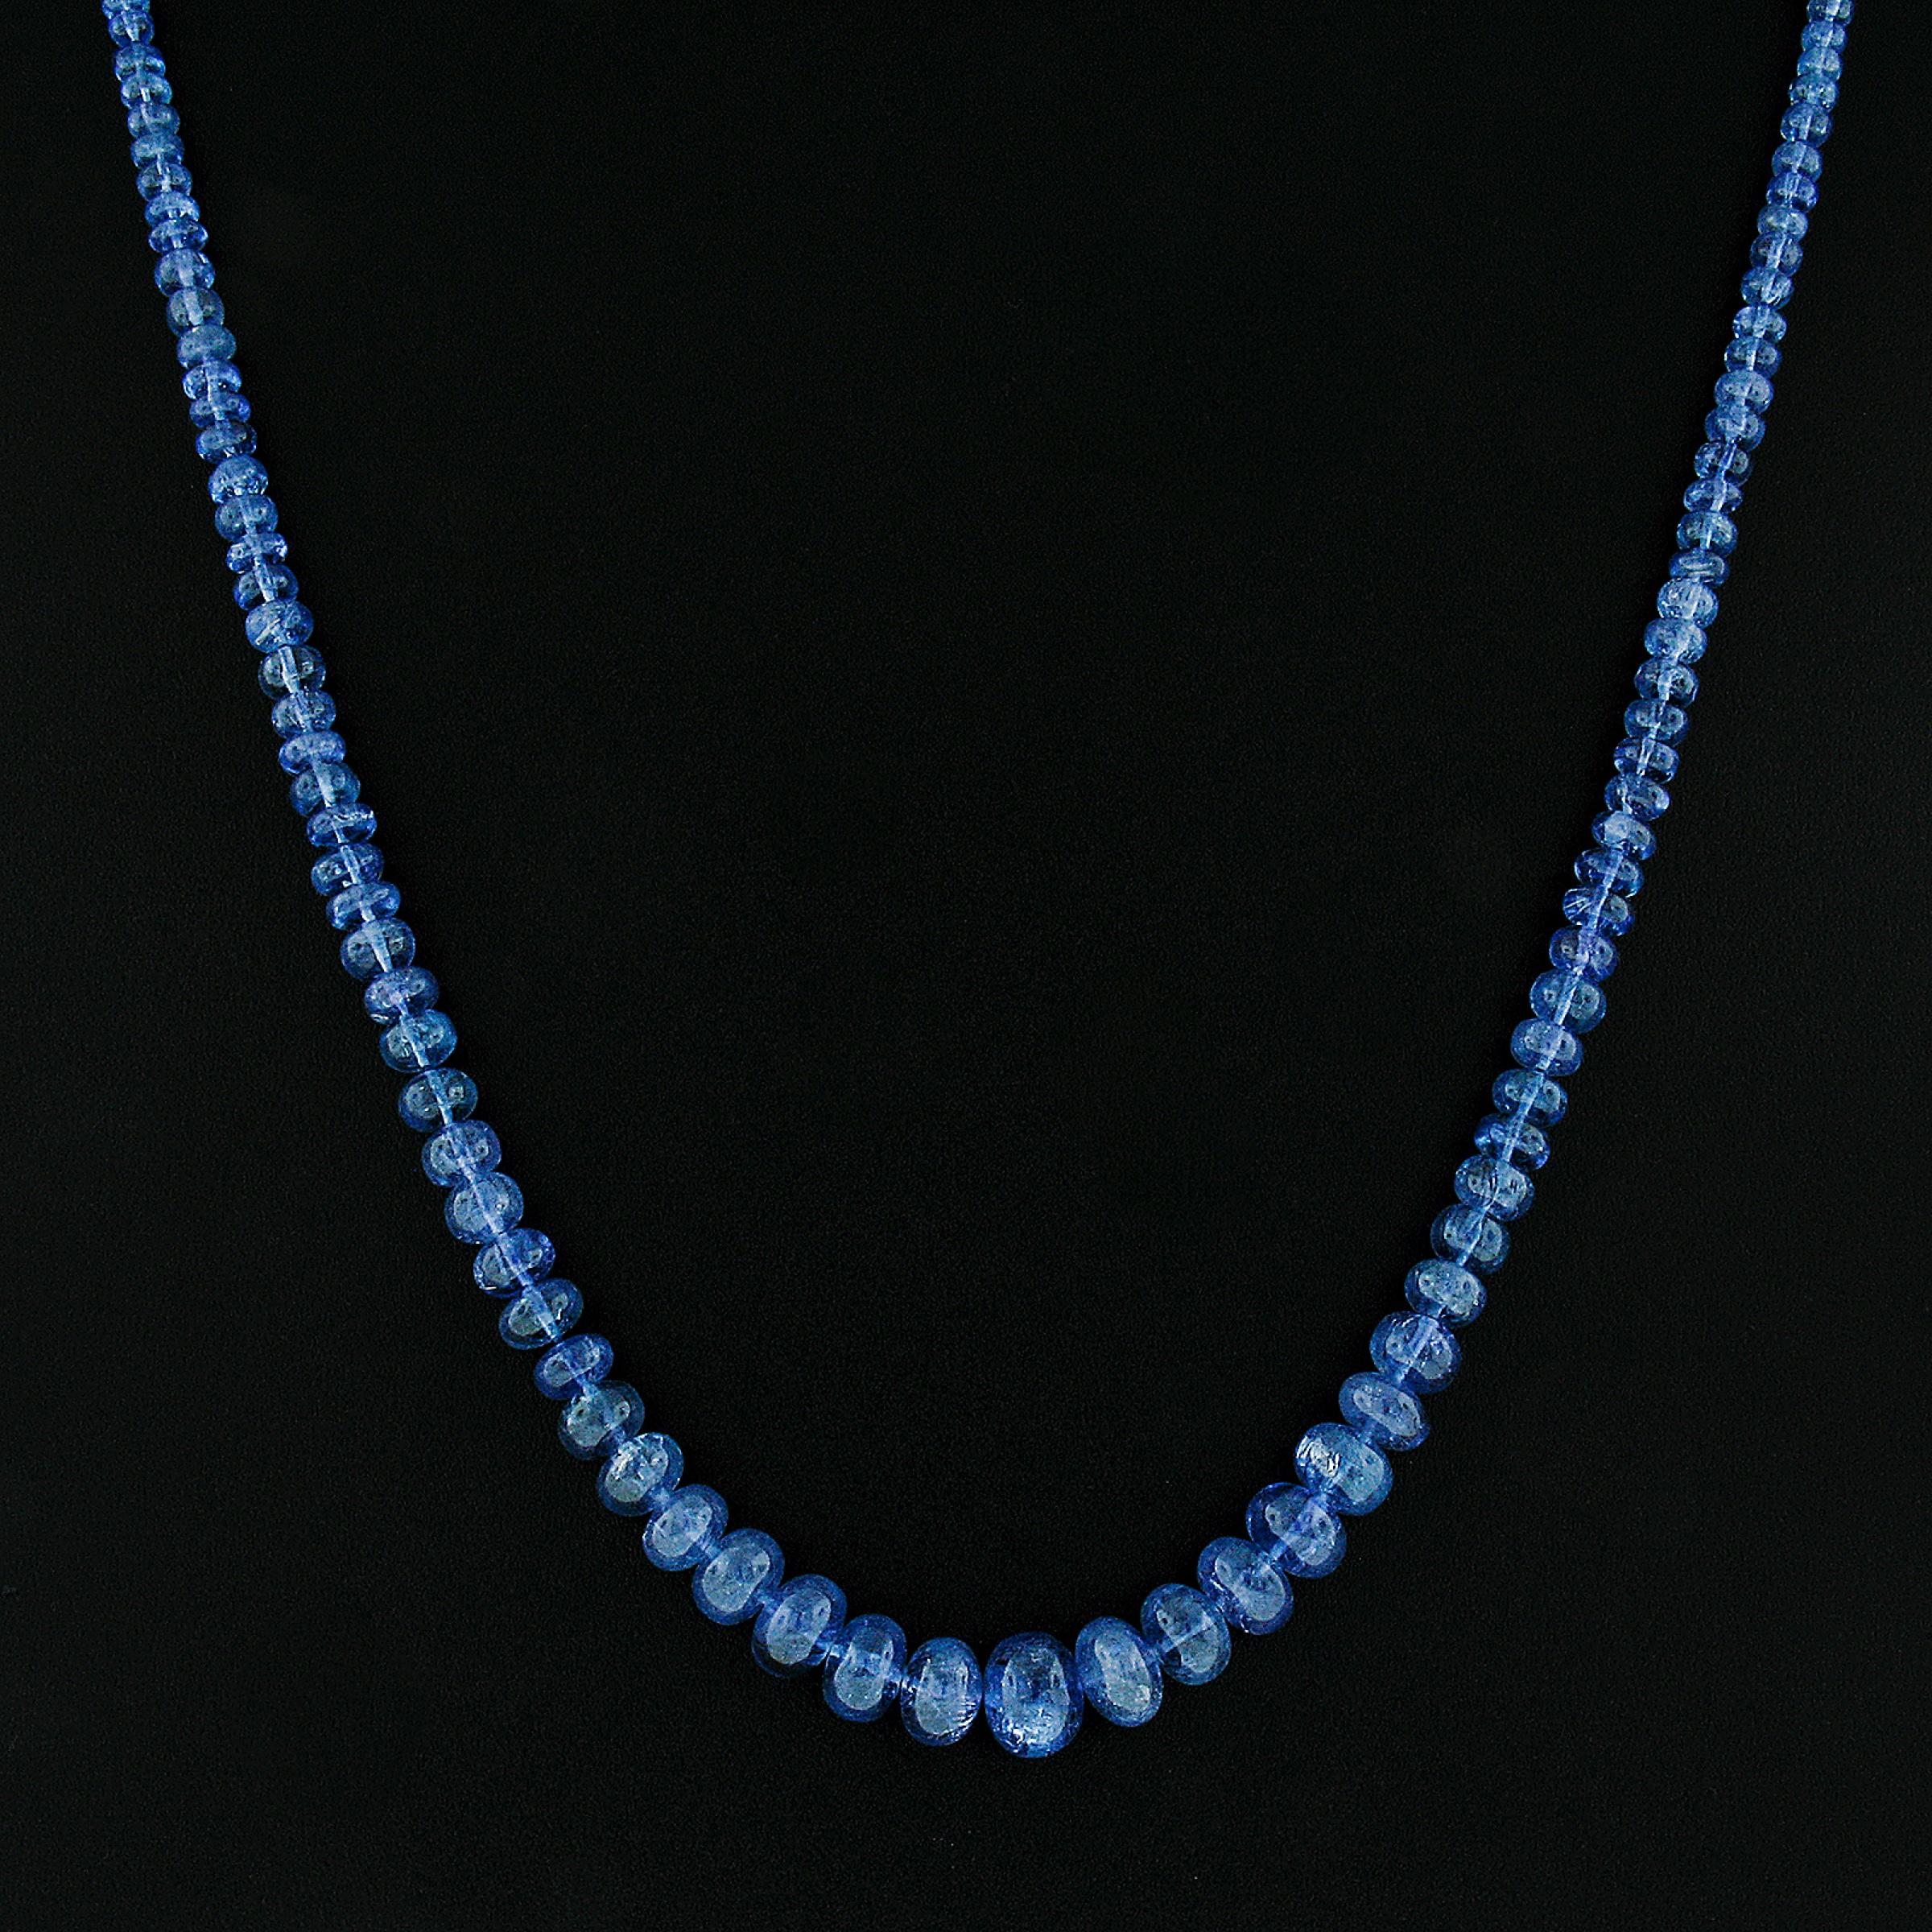 GIA Rondelle Beads Tanzanite Graduated Strand Necklace w/ 14k Gold Chain & Clasp For Sale 2